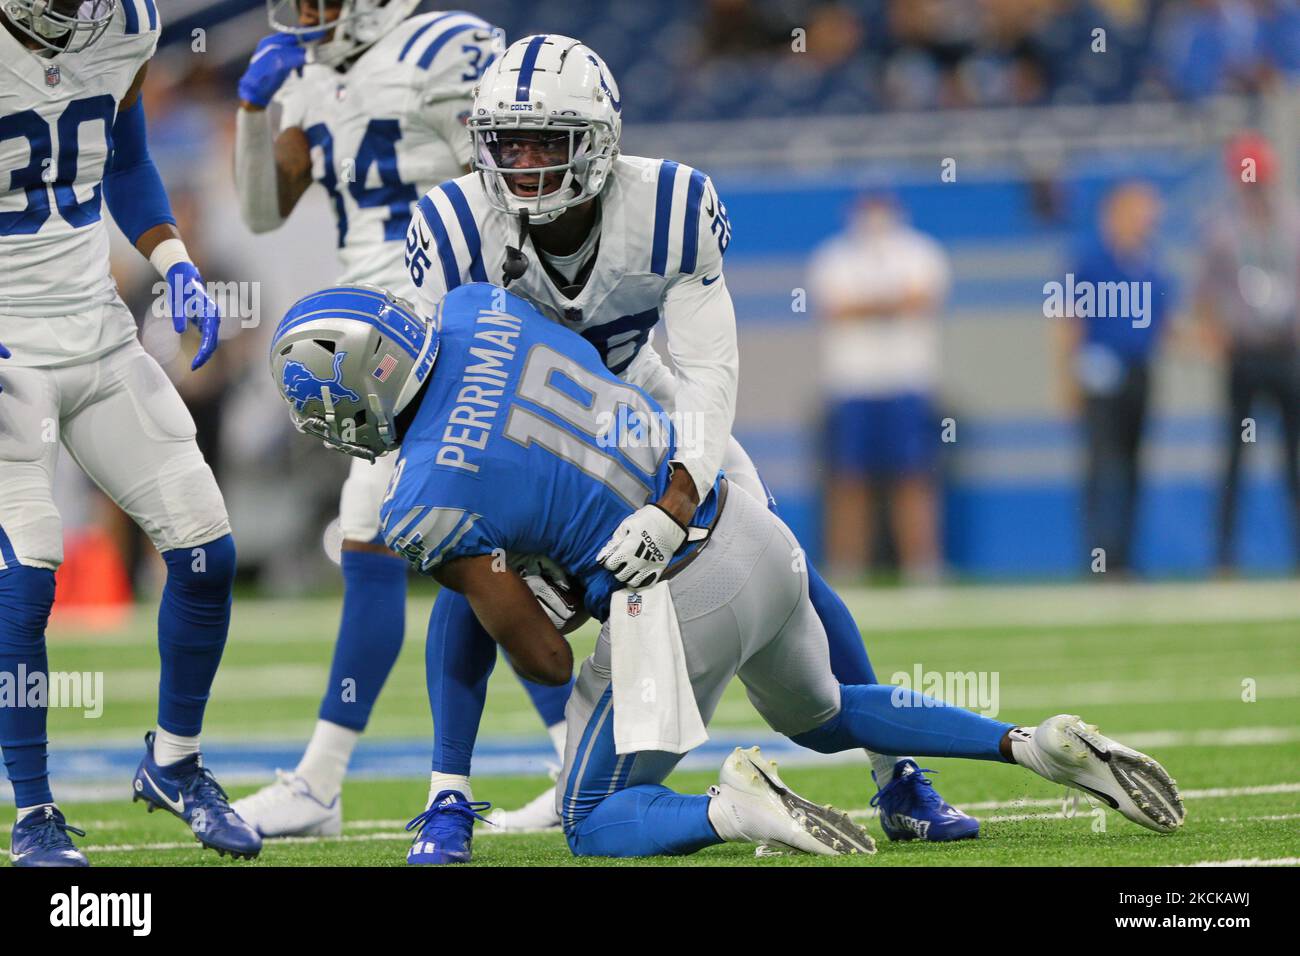 Detroit Lions wide receiver Breshad Perriman (19) is tackled by Indianapolis Colts cornerback Rock Ya-Sin (26) during the first half of the preseason NFL football game in Detroit, Michigan USA, on Friday, August 27, 2021. (Photo by Jorge Lemus/NurPhoto) Stock Photo